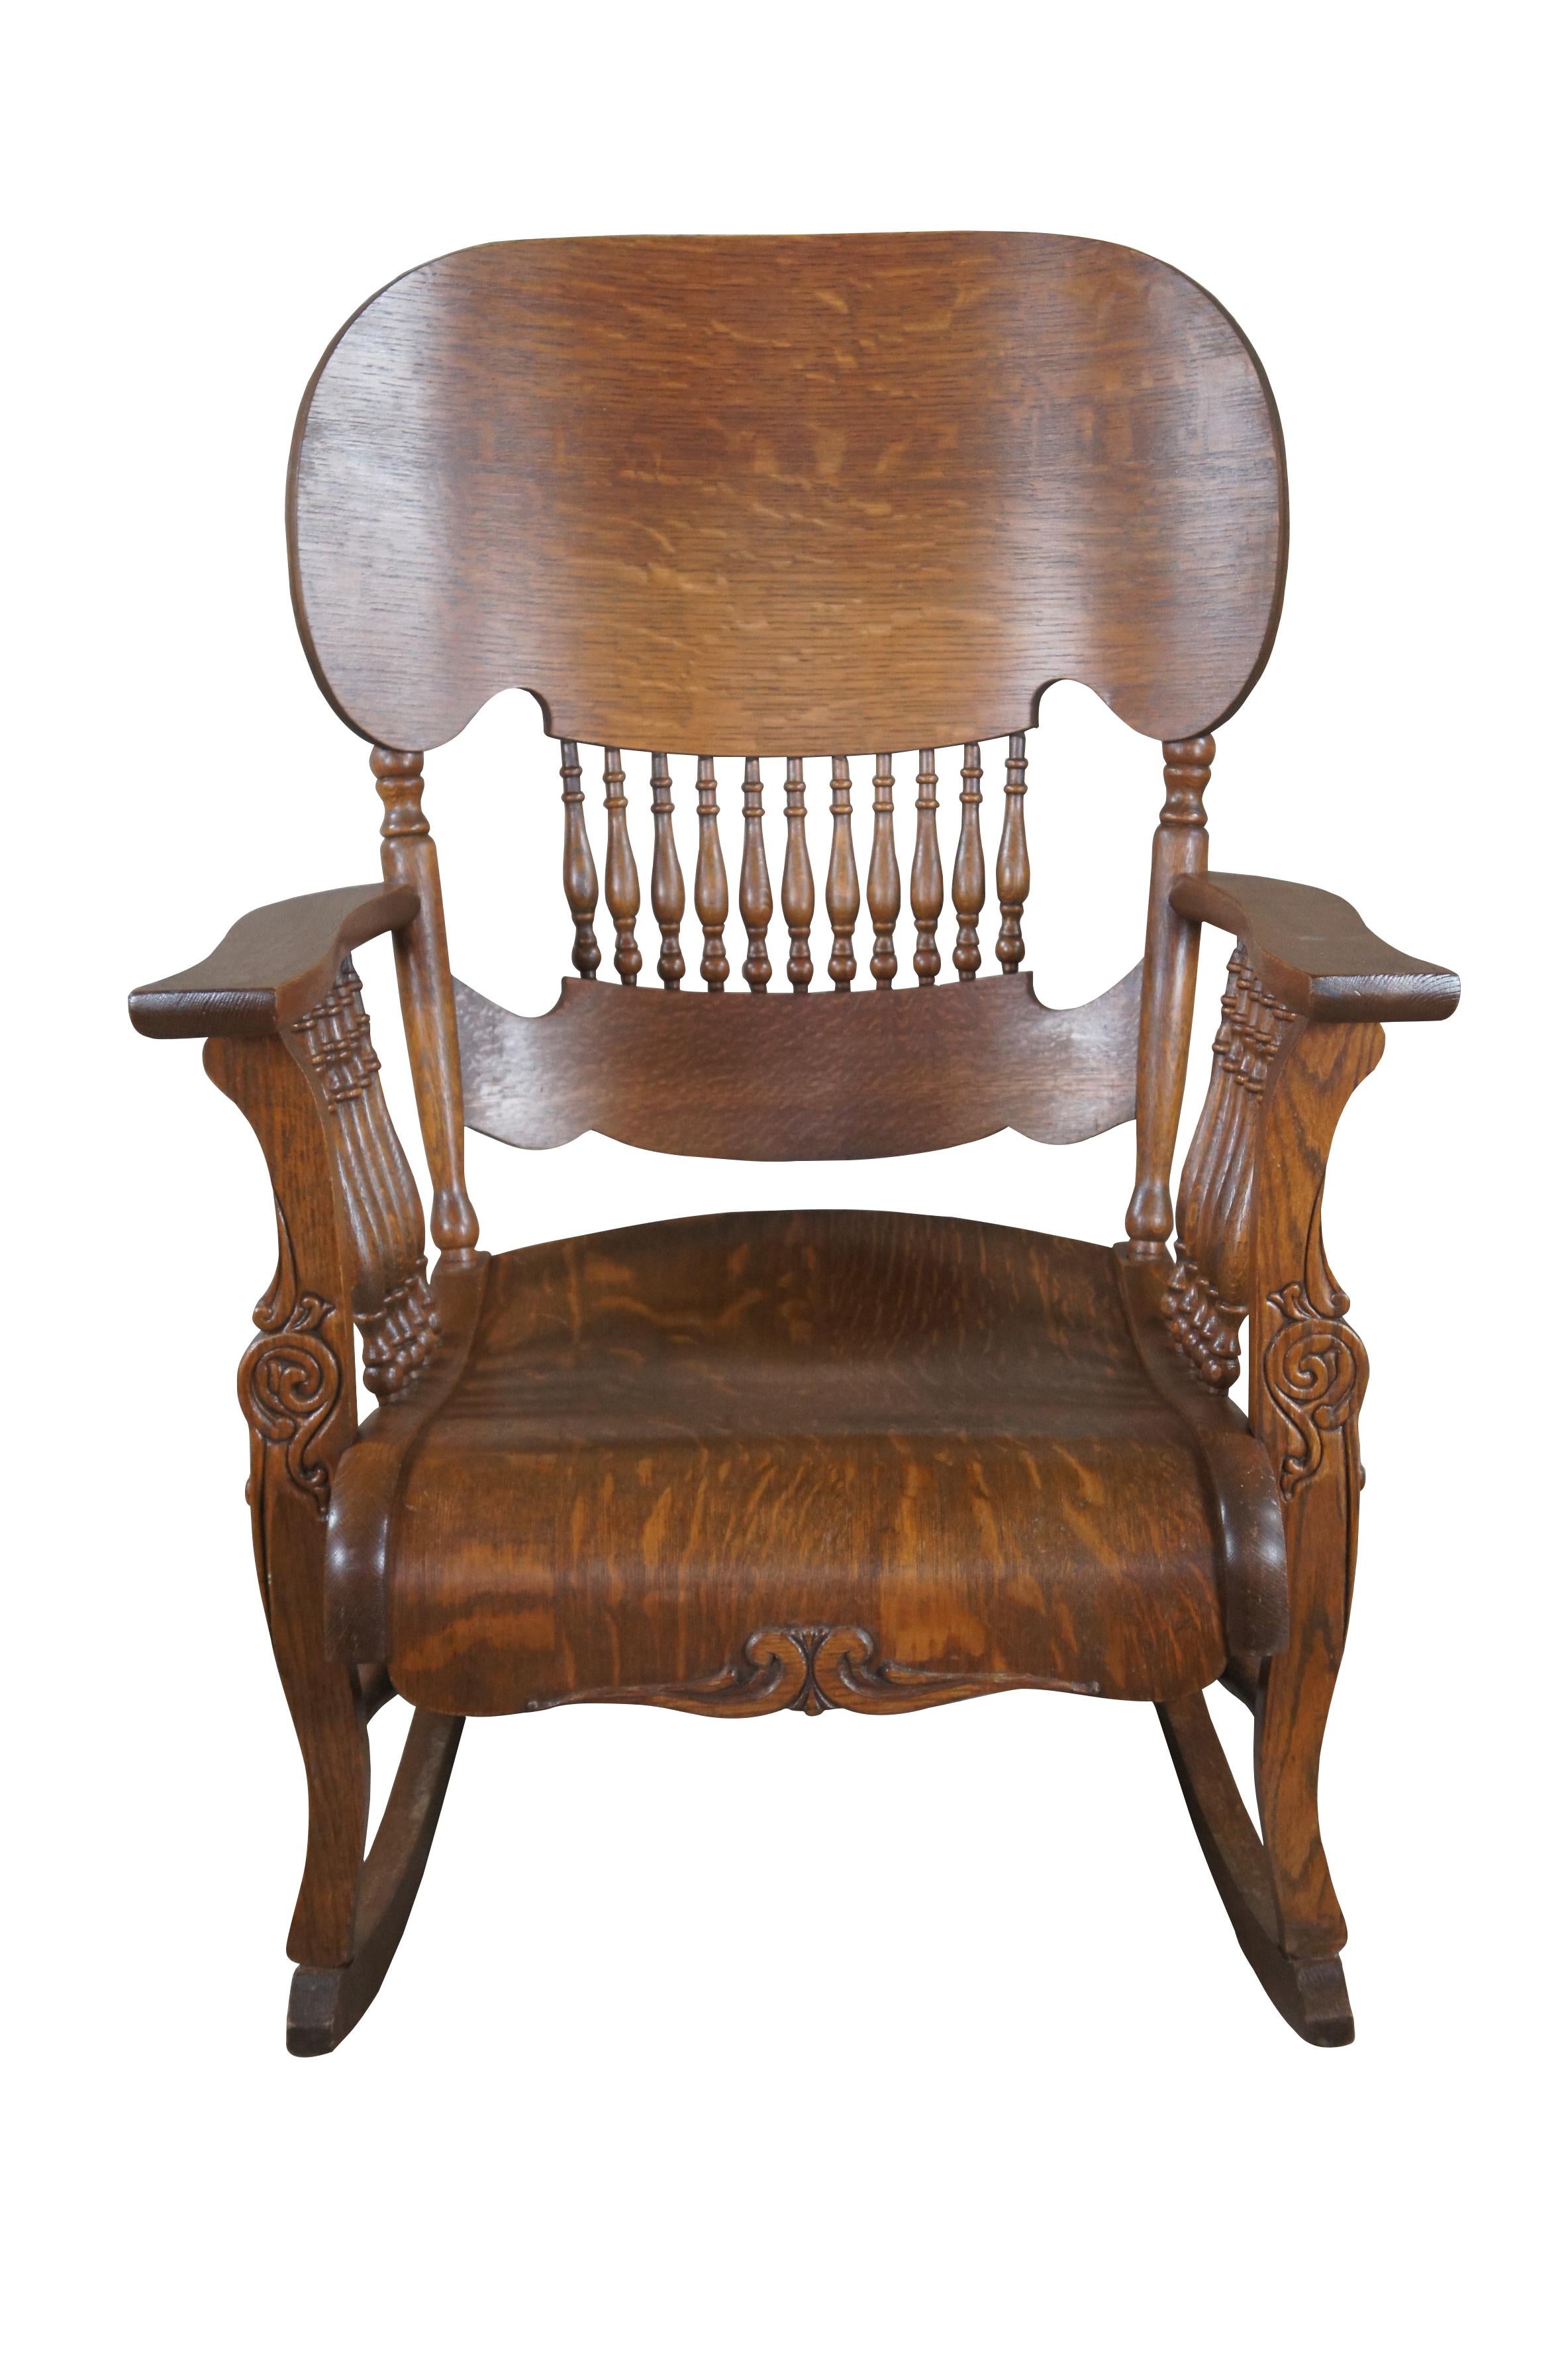 A gorgeous American Arts and Crafts Mission chair, circa 1930s This gem features a spindle side and back leading to a shielded crown and serpentine apron. Made from Quartersawn (Tiger Oak) with a bentwood seat. Carved accents ordain the front sides